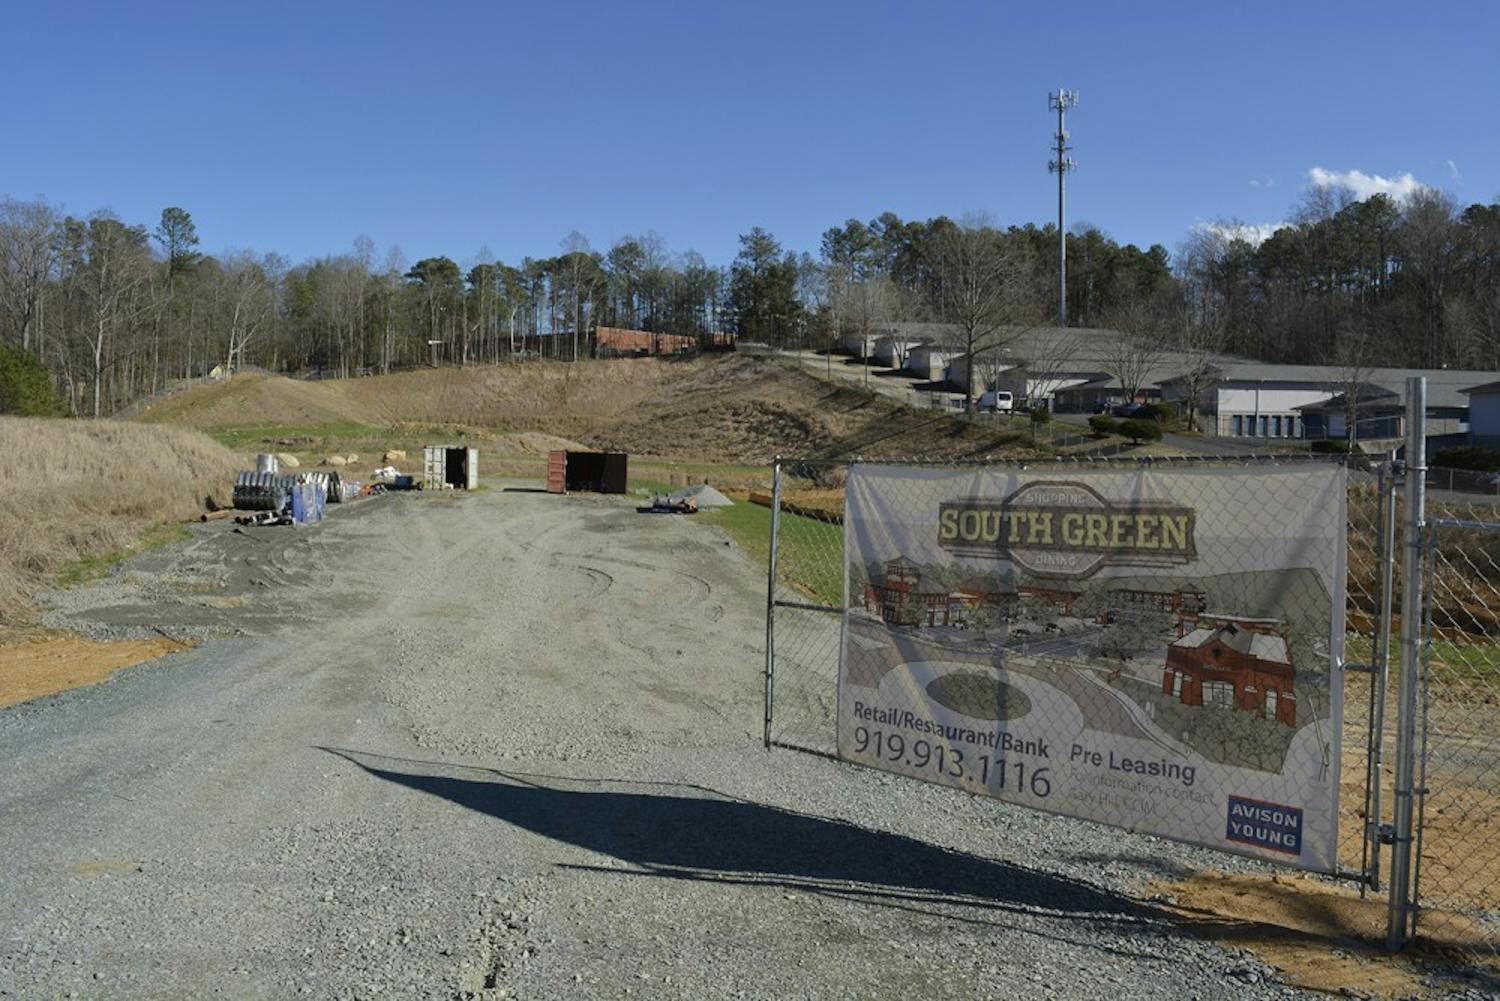 South Green development in Carrboro will be home to new restaurants and retail shops on S. Greensboro St. Construction has yet to begin.